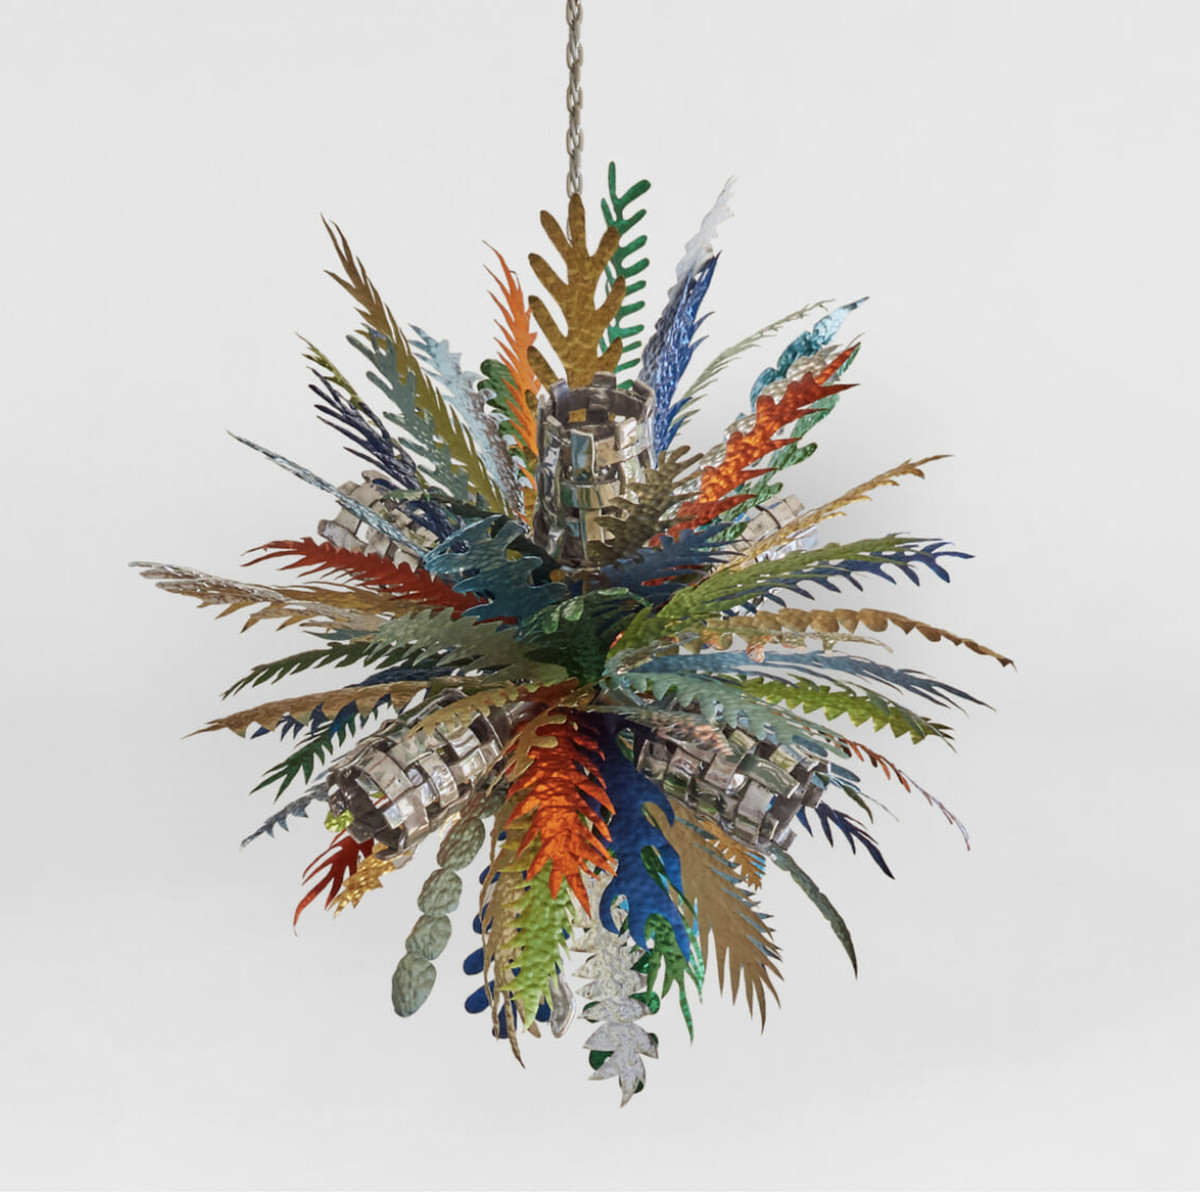 A chandelier composed of multi-color, metallic leaves